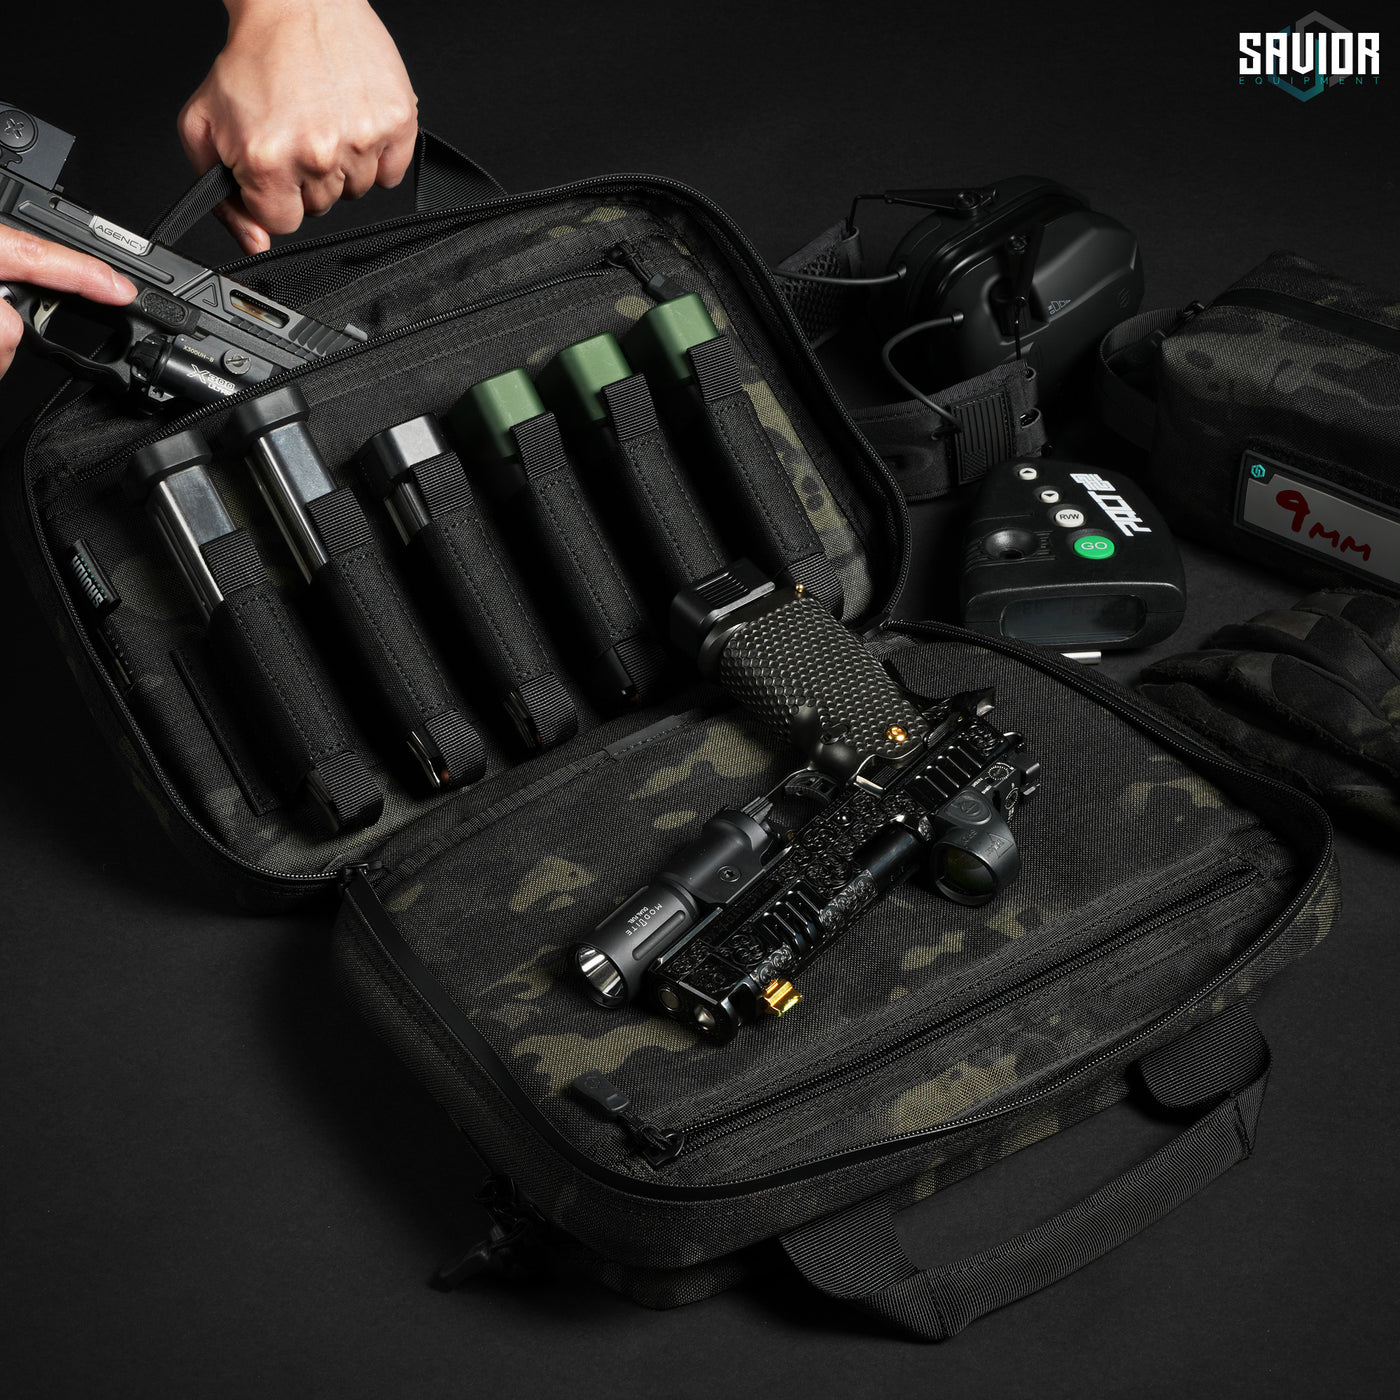 Comfortably Designed - Interally lined with 1000D Cordura fabric, the two compartments will keep your pistols snug with its soft-touch cushioning. Firearms & accessories shown not included.